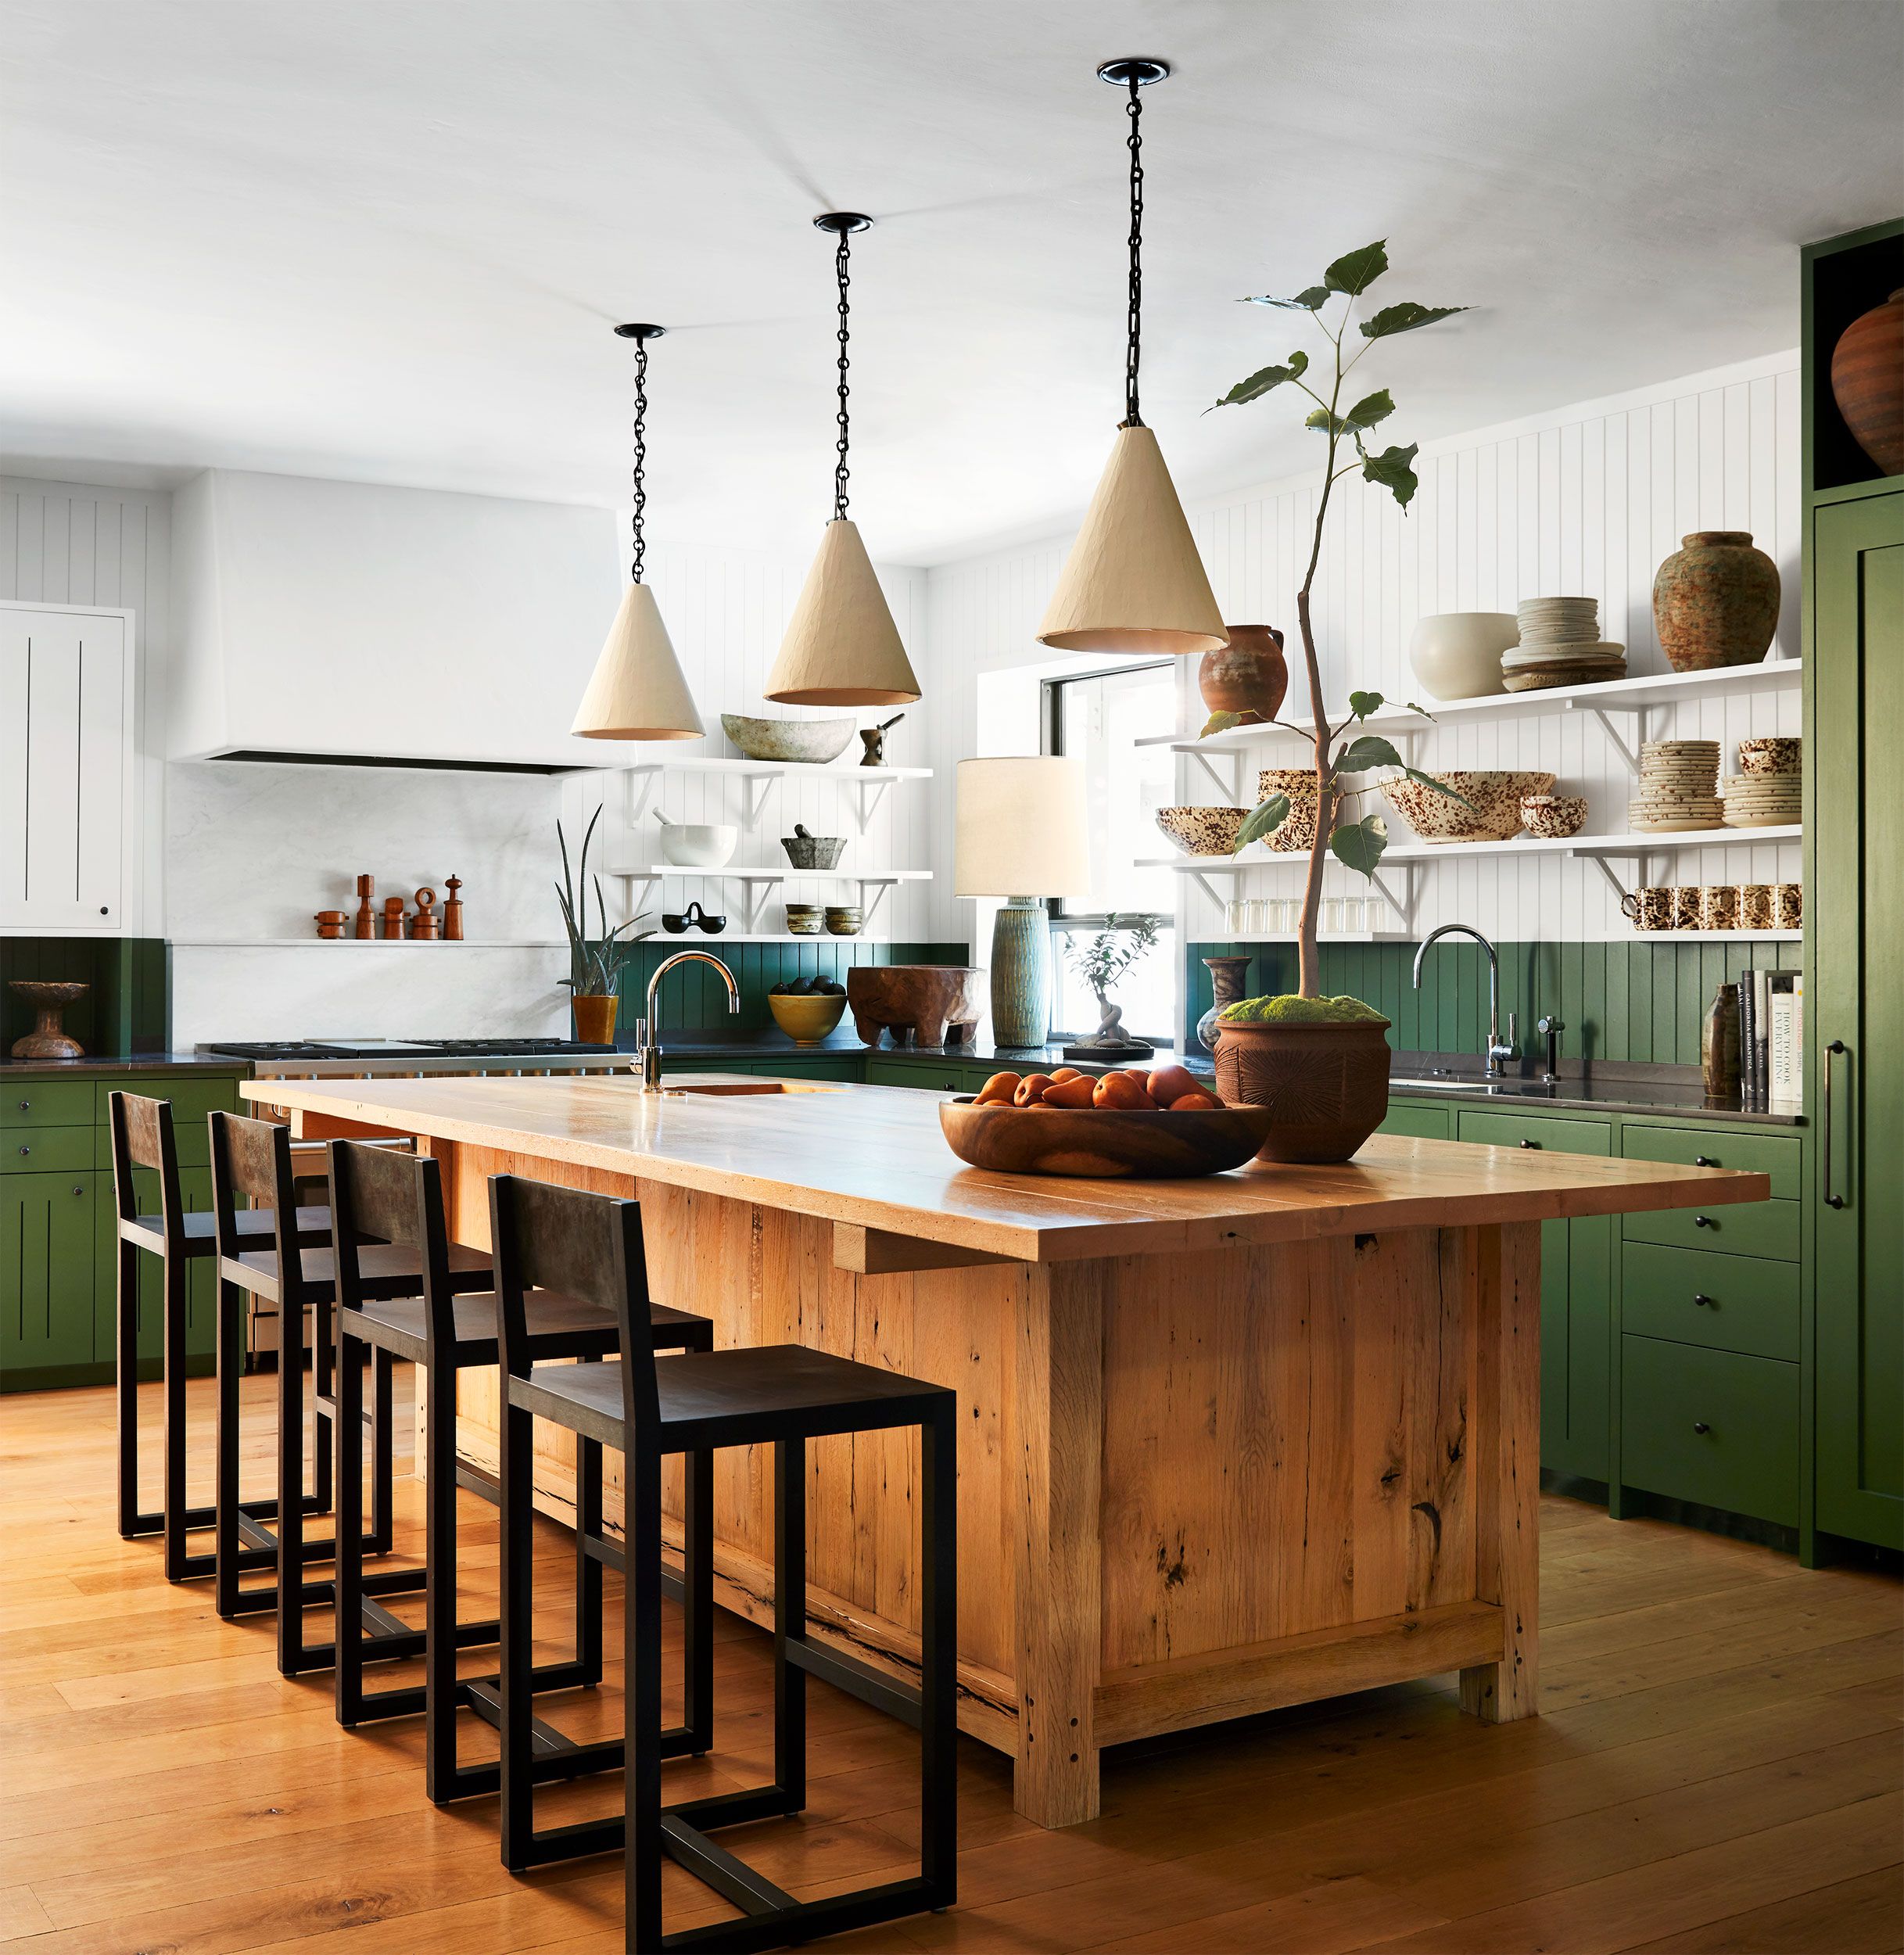 50 Best Kitchen Paint Colors, What Color Kitchens Are In Style 2021